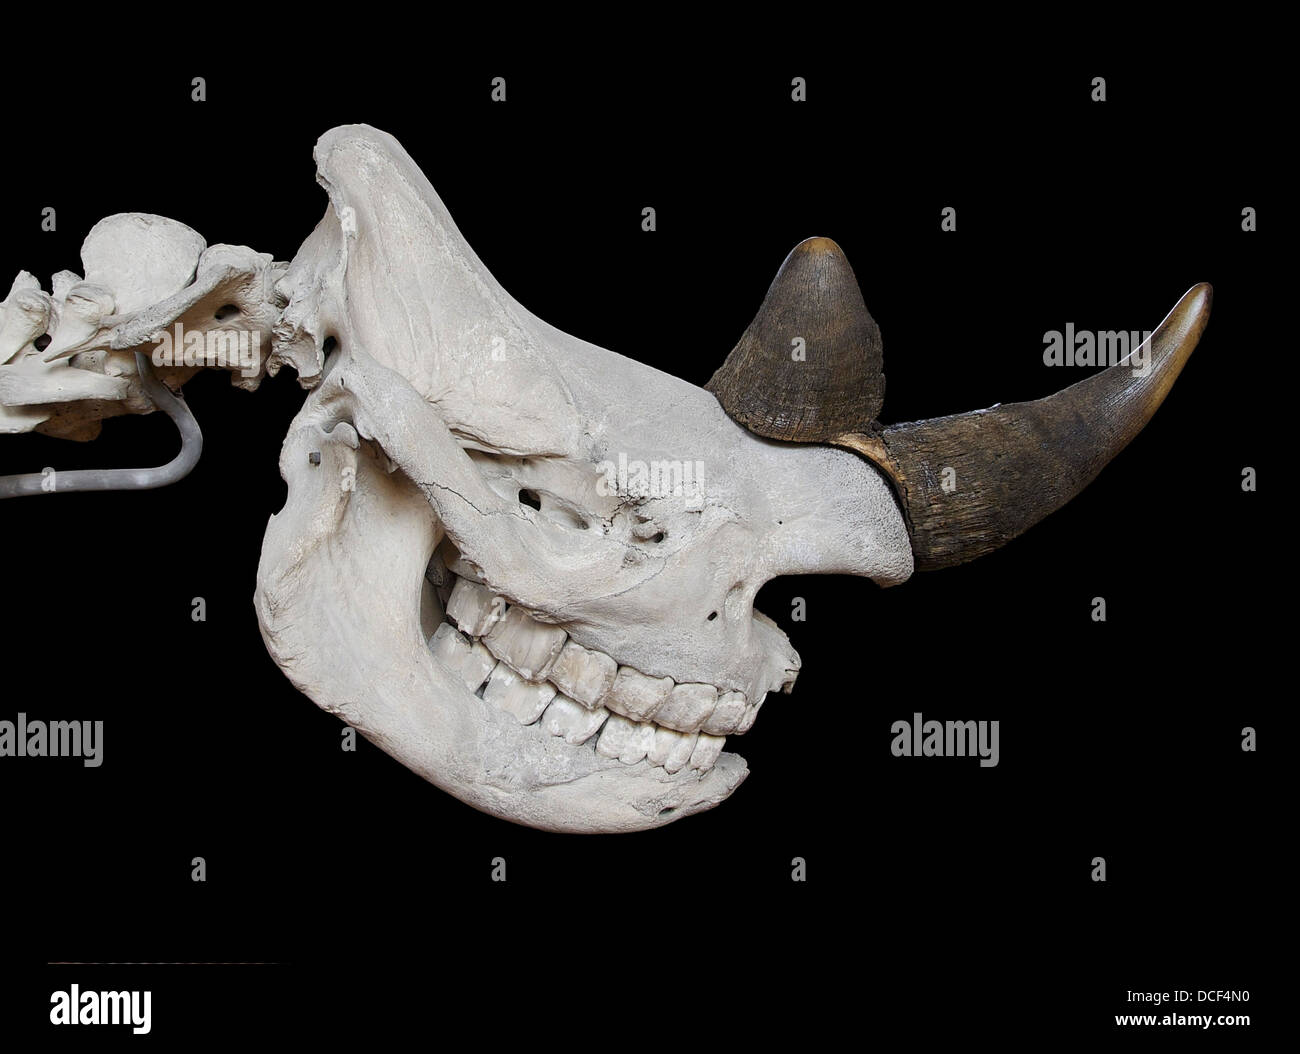 Diceros bicornis, Black Rhinoceros. Skull. Gallery of Paleontology and Compared Anatomy, National Museum of Natural History, Par Stock Photo